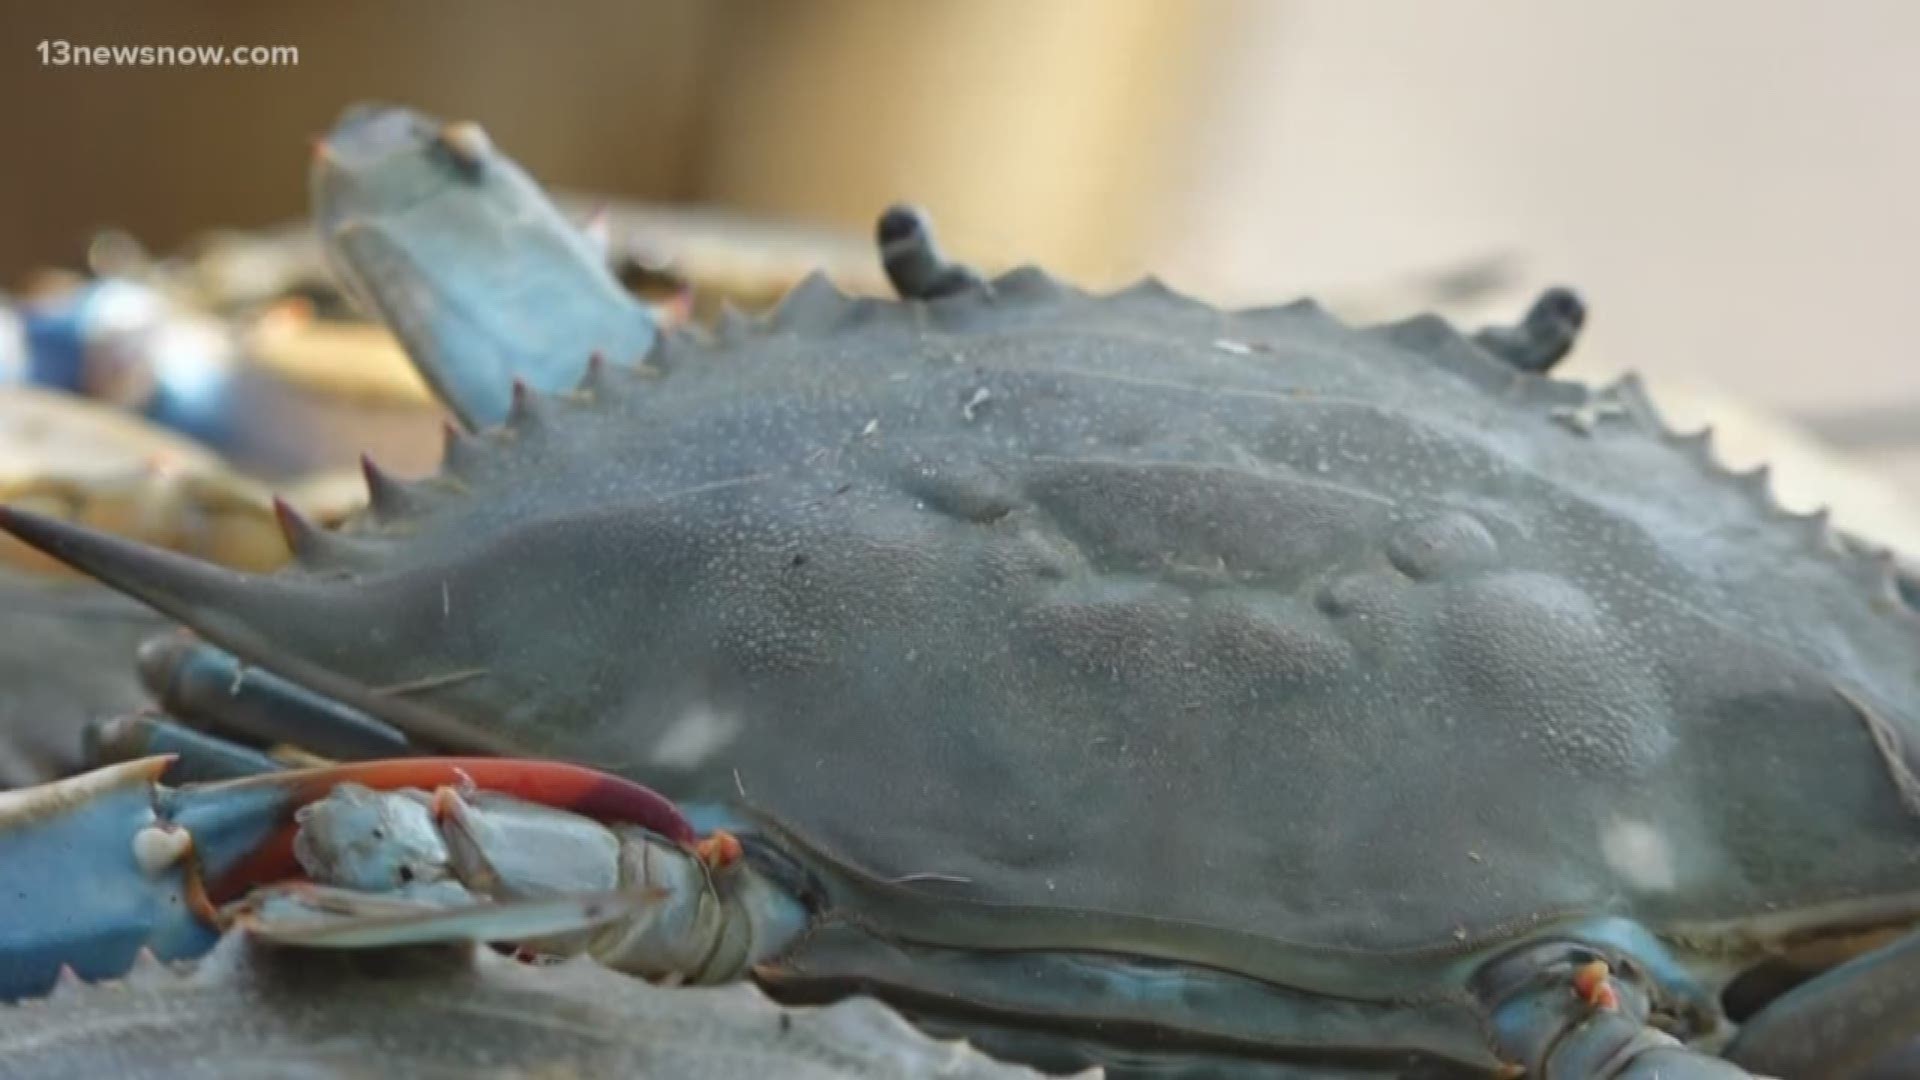 Processors mix foreign crab meat with the fresh catches to save money. Researchers are now using DNA testing to protect the crab industry.